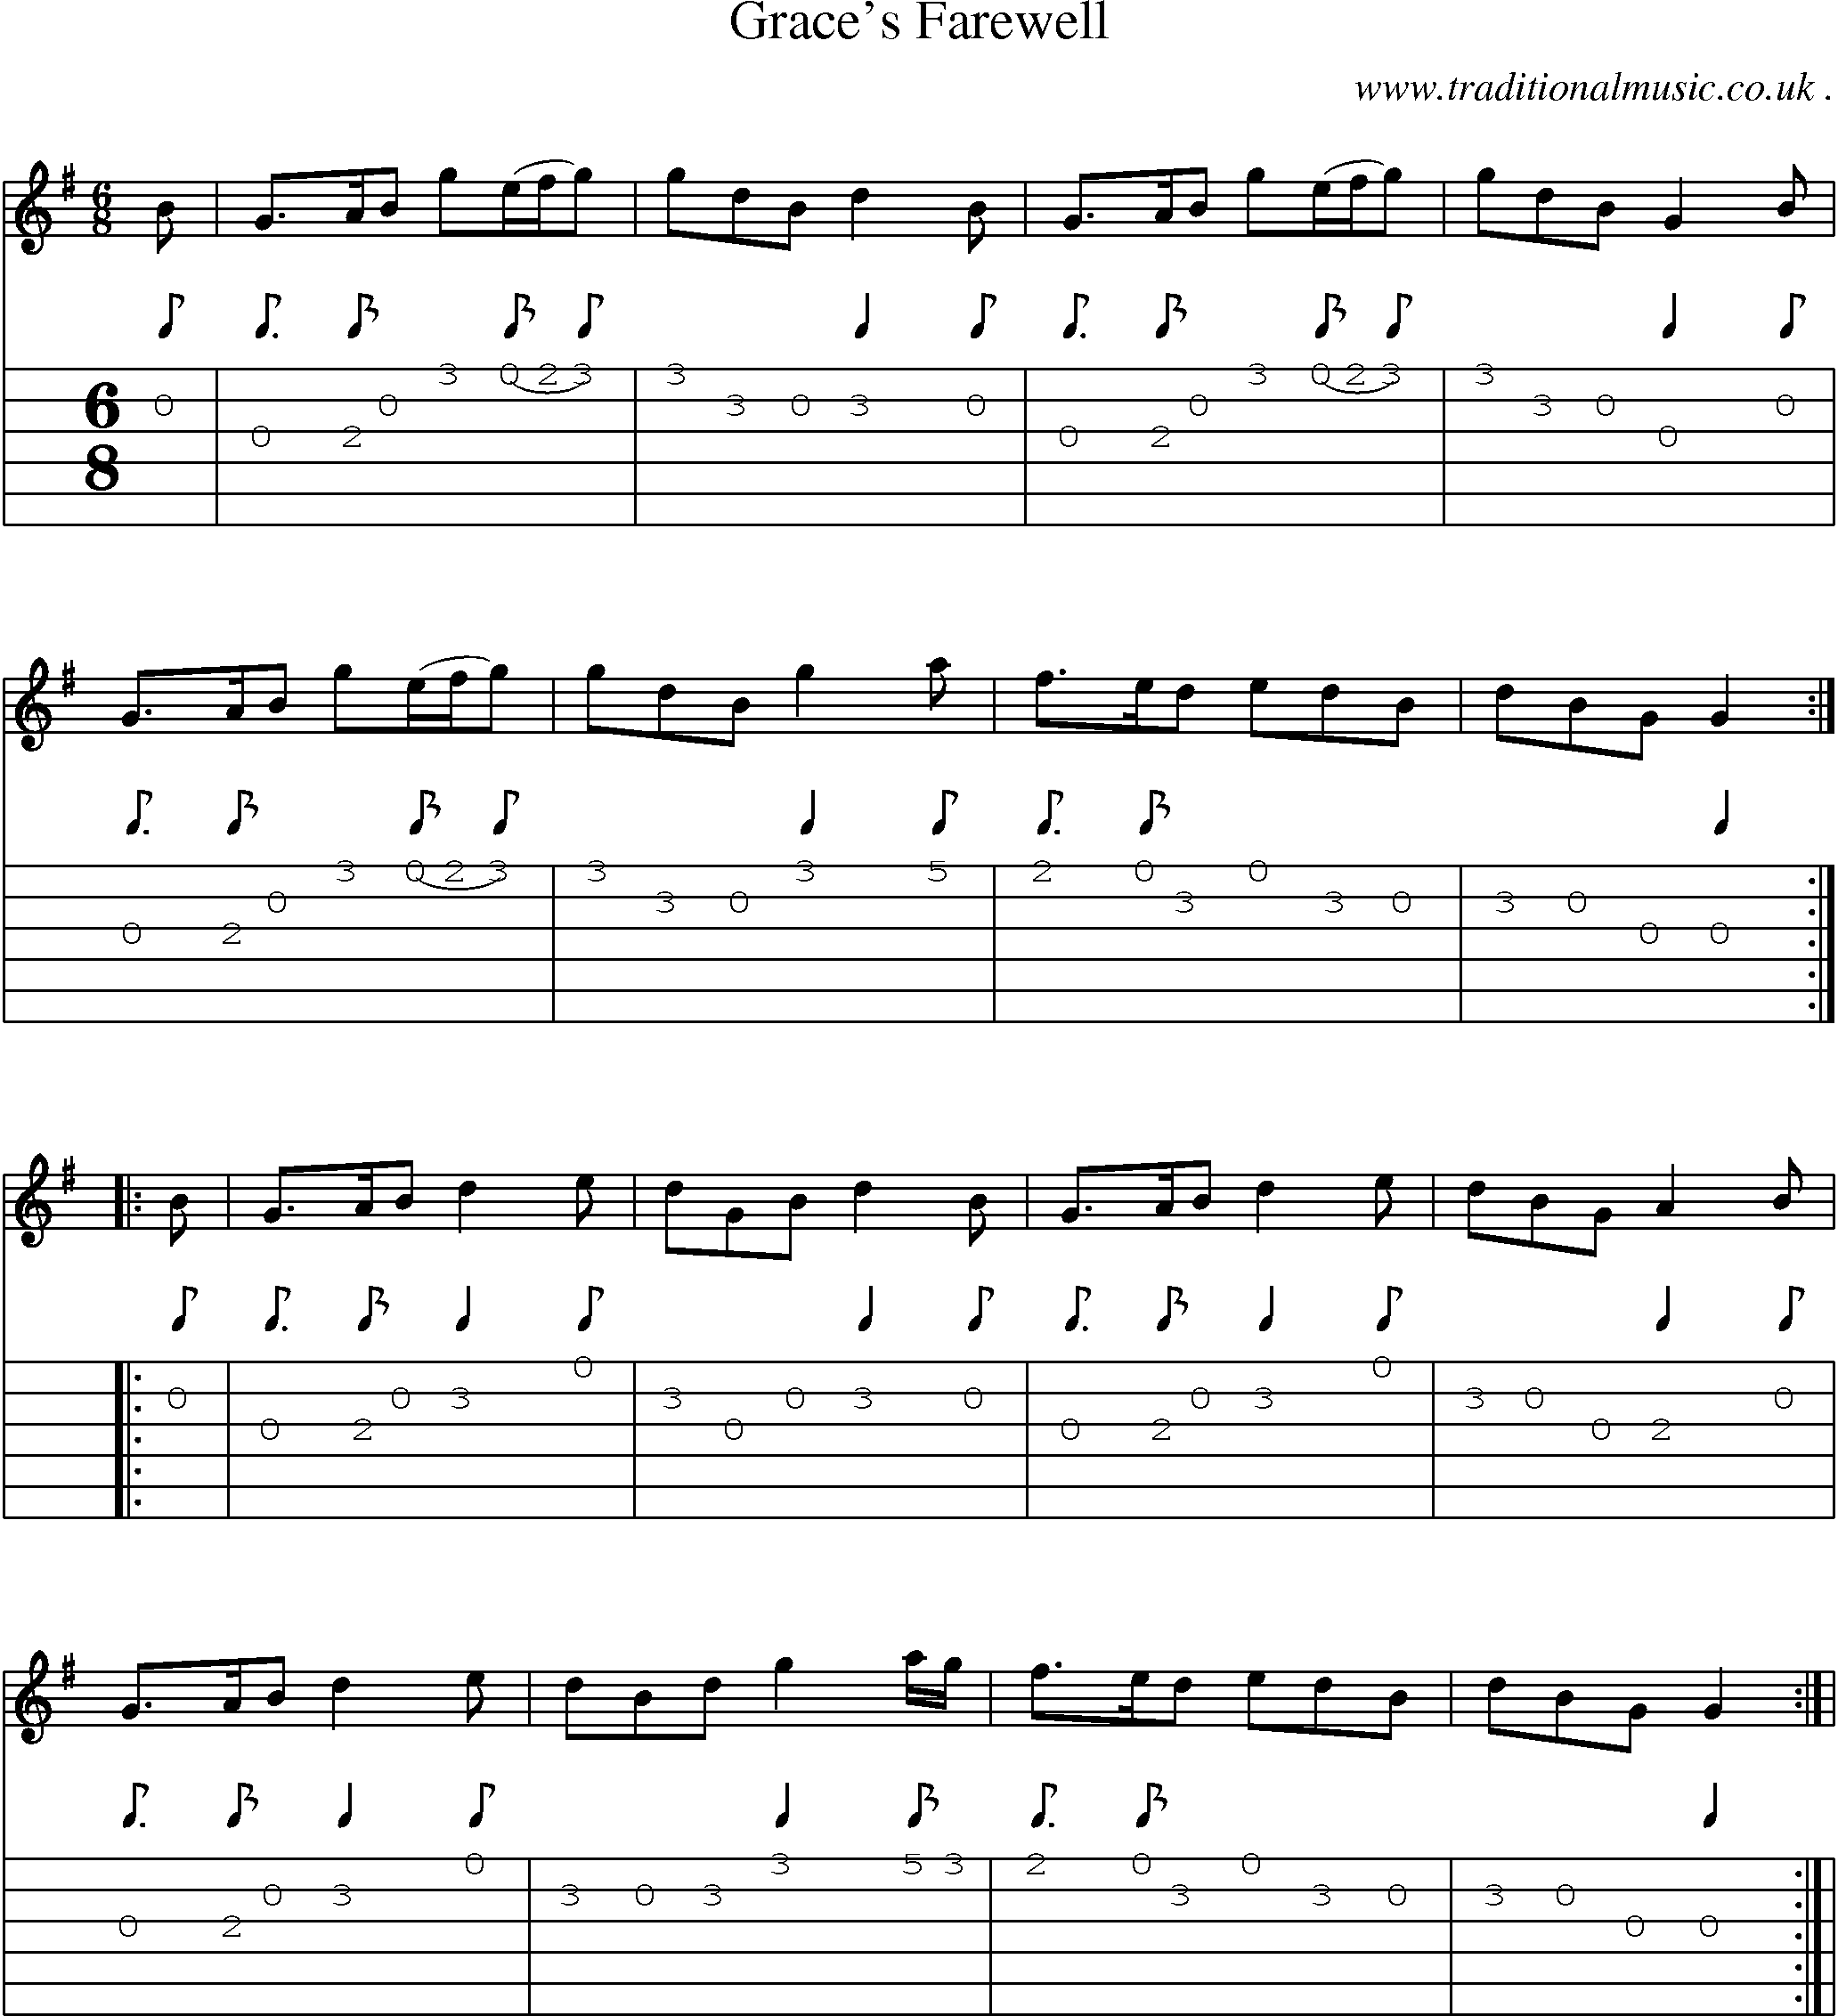 Sheet-Music and Guitar Tabs for Graces Farewell